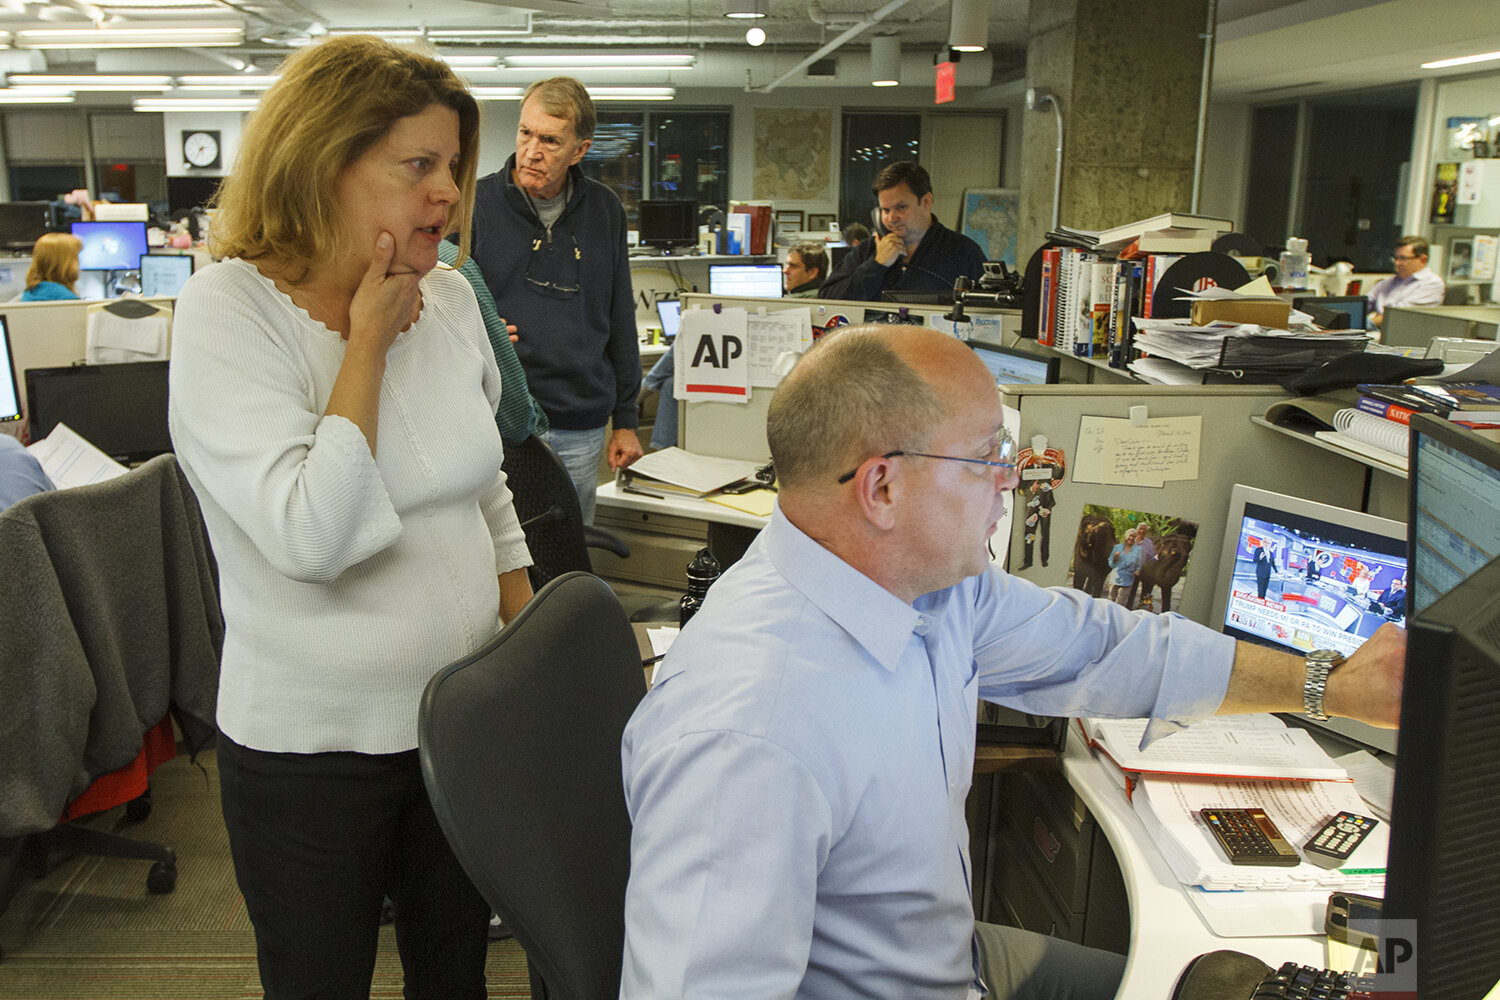  Then-Associated Press Washington bureau chief Sally Buzbee, talks with Stephen Ohlemacher, who in 2020 is the decision desk editor, in the early morning hours of Wednesday, Nov. 9, 2016, at the Washington bureau of The Associated Press during electi